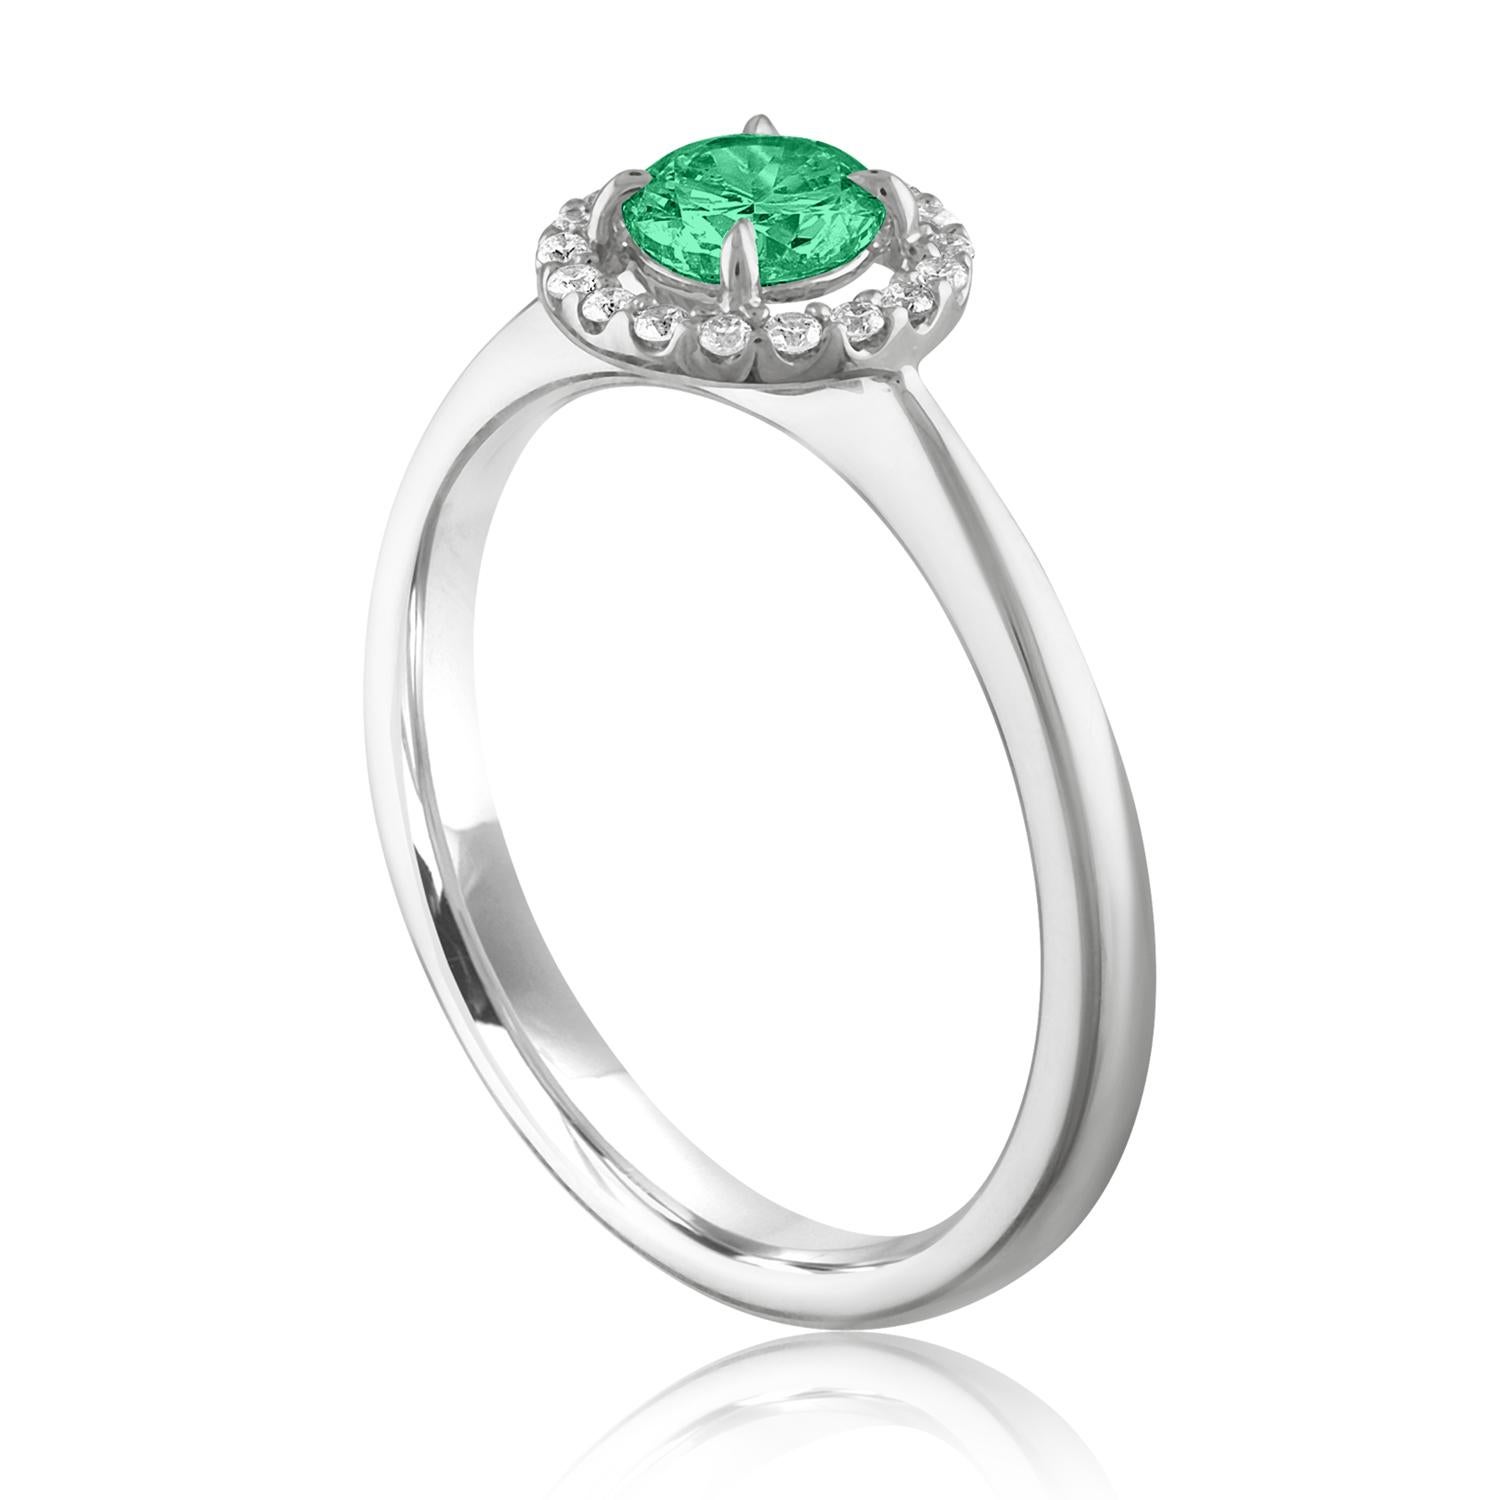 Beautiful Diamond & Emerald Halo Ring
The ring is 18K White Gold.
There are 0.12 Carats in Diamonds F/G VS/SI
The Center is Round 0.41 Carat Emerald.
The Emerald is AGL certified.
The ring is a size 6.00, sizable.
The ring weighs 2.8 grams.